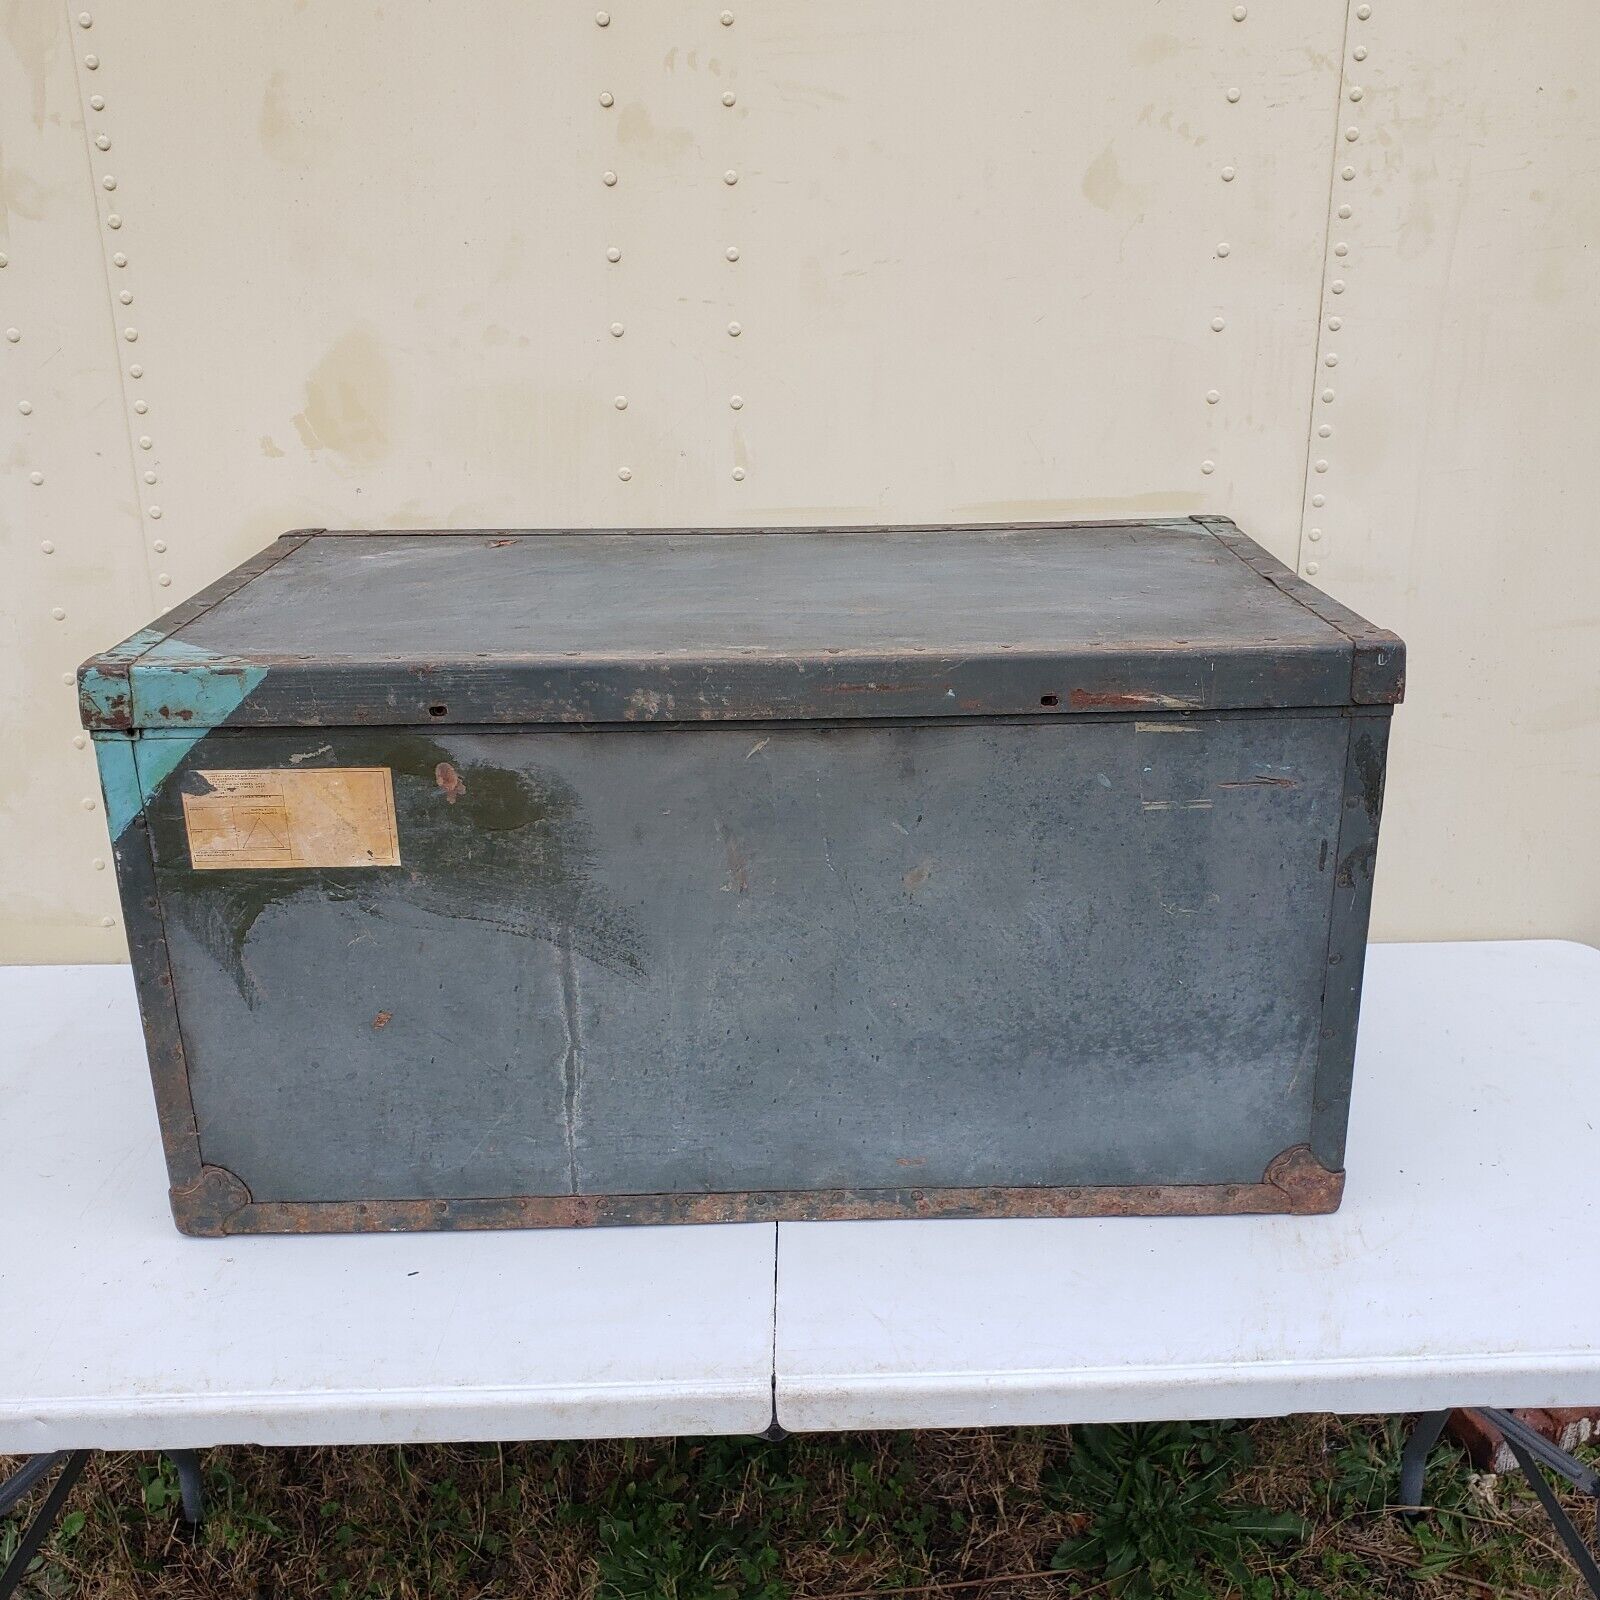 VTG Texas Trunk Company Military Nested Chest MG-1A #1 Footlocker June 1958 USAF